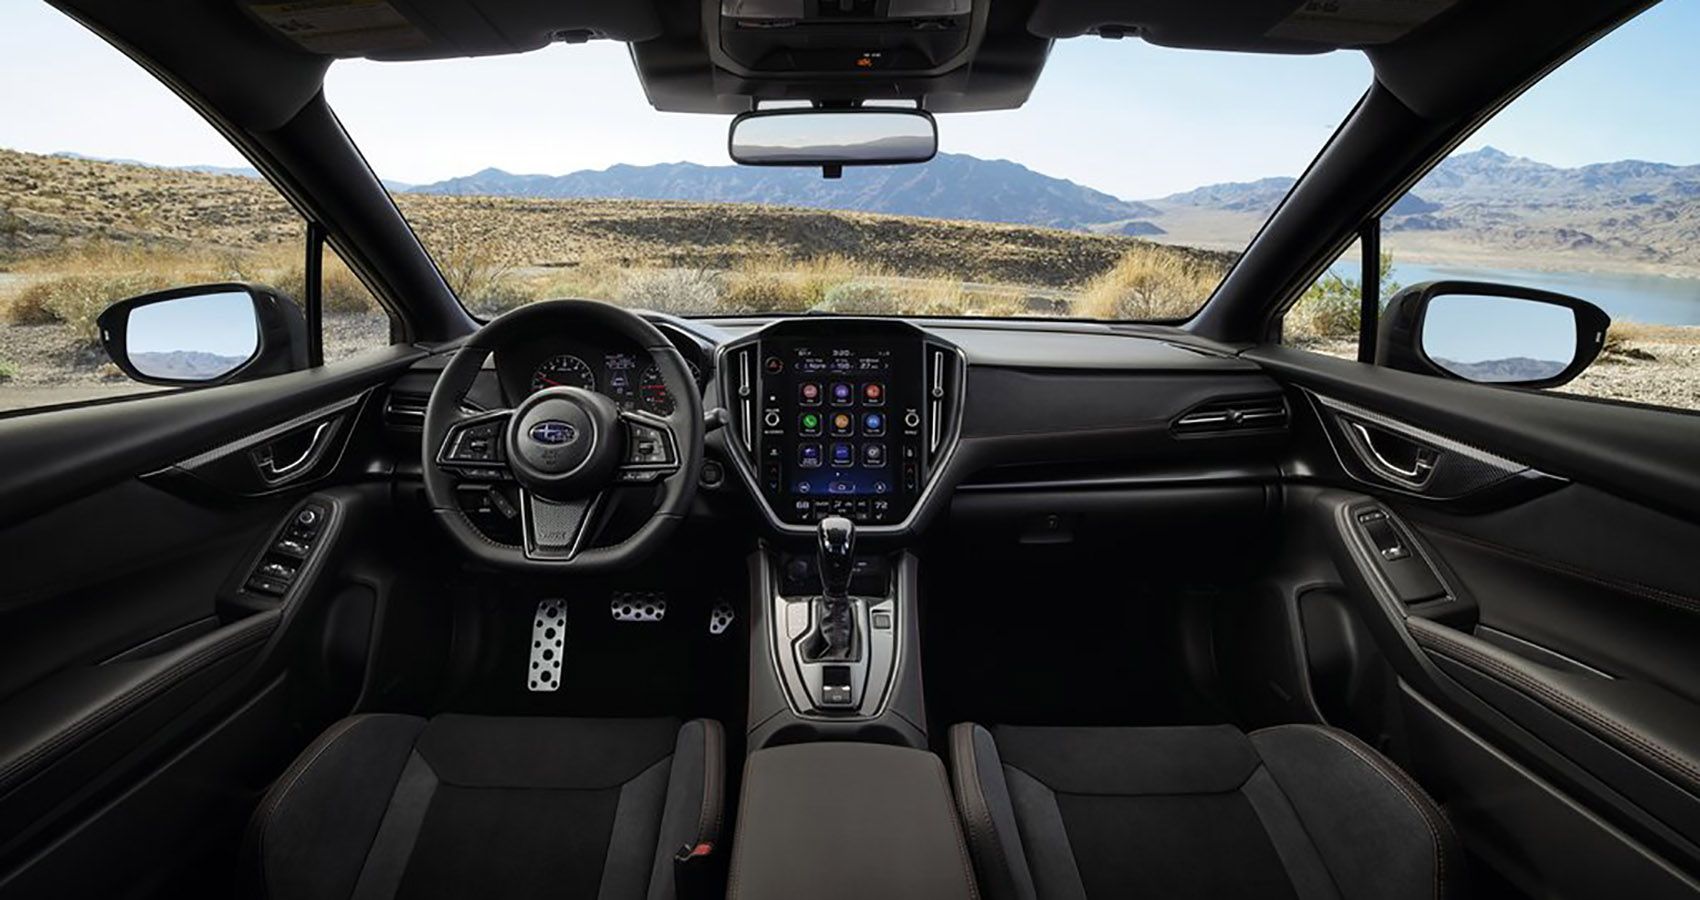 Check Out The Stunning Interior Of The Subaru WRX Wagon